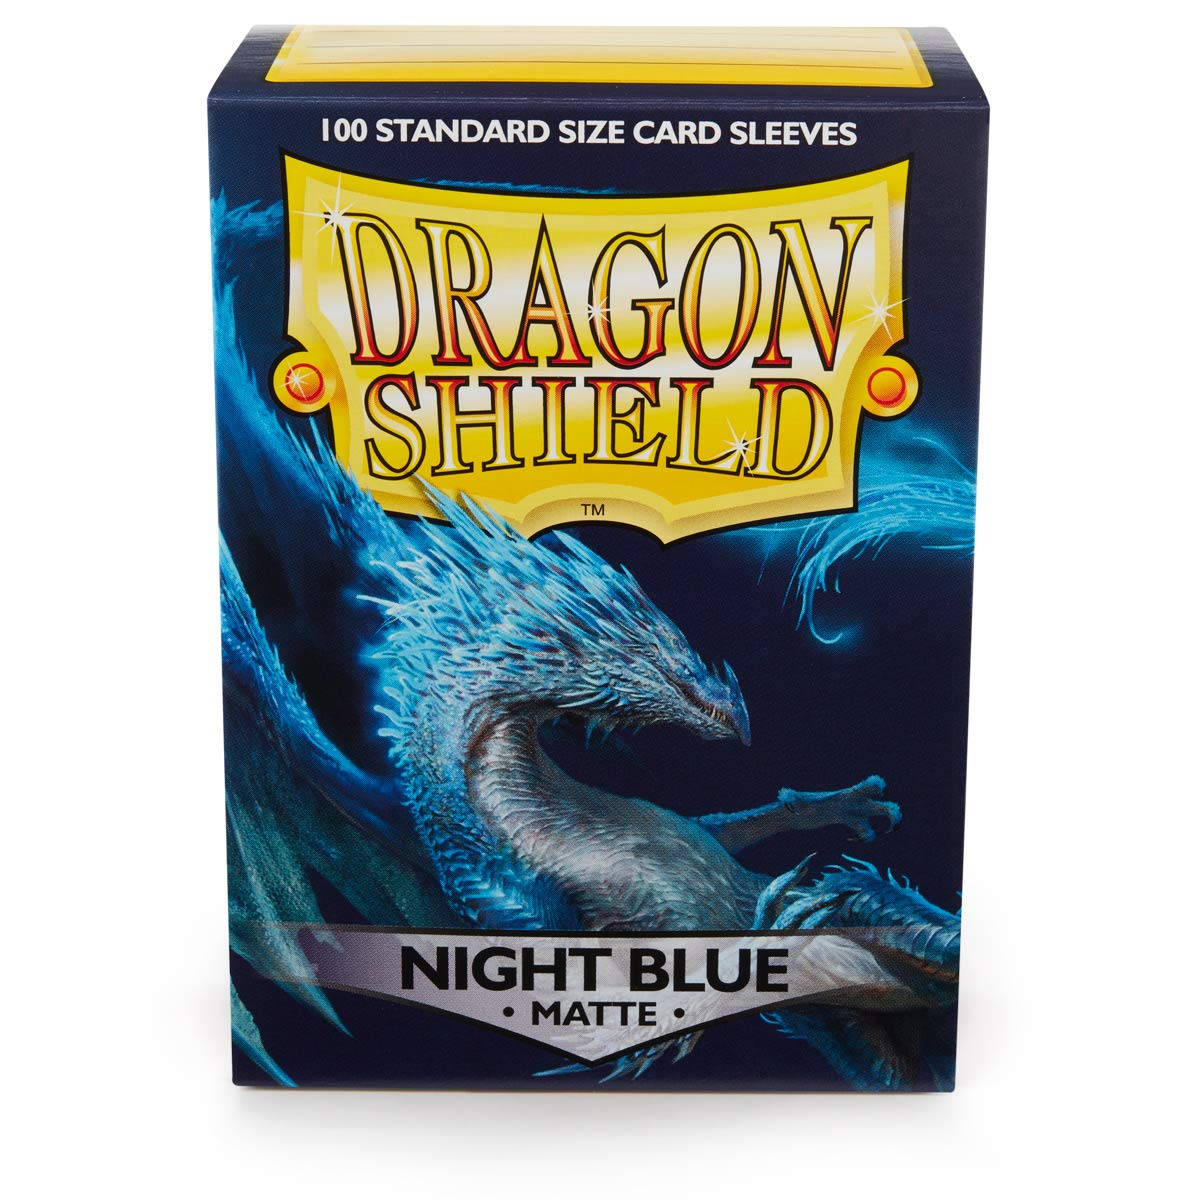 Dragon Shield Standard Size Sleeves – Matte Night Blue 100CT - Card Sleeves are Smooth & Tough - Compatible with Pokemon, Yu-Gi-Oh!, & Magic The Gathering Card Sleeves – MTG, TCG, OCG